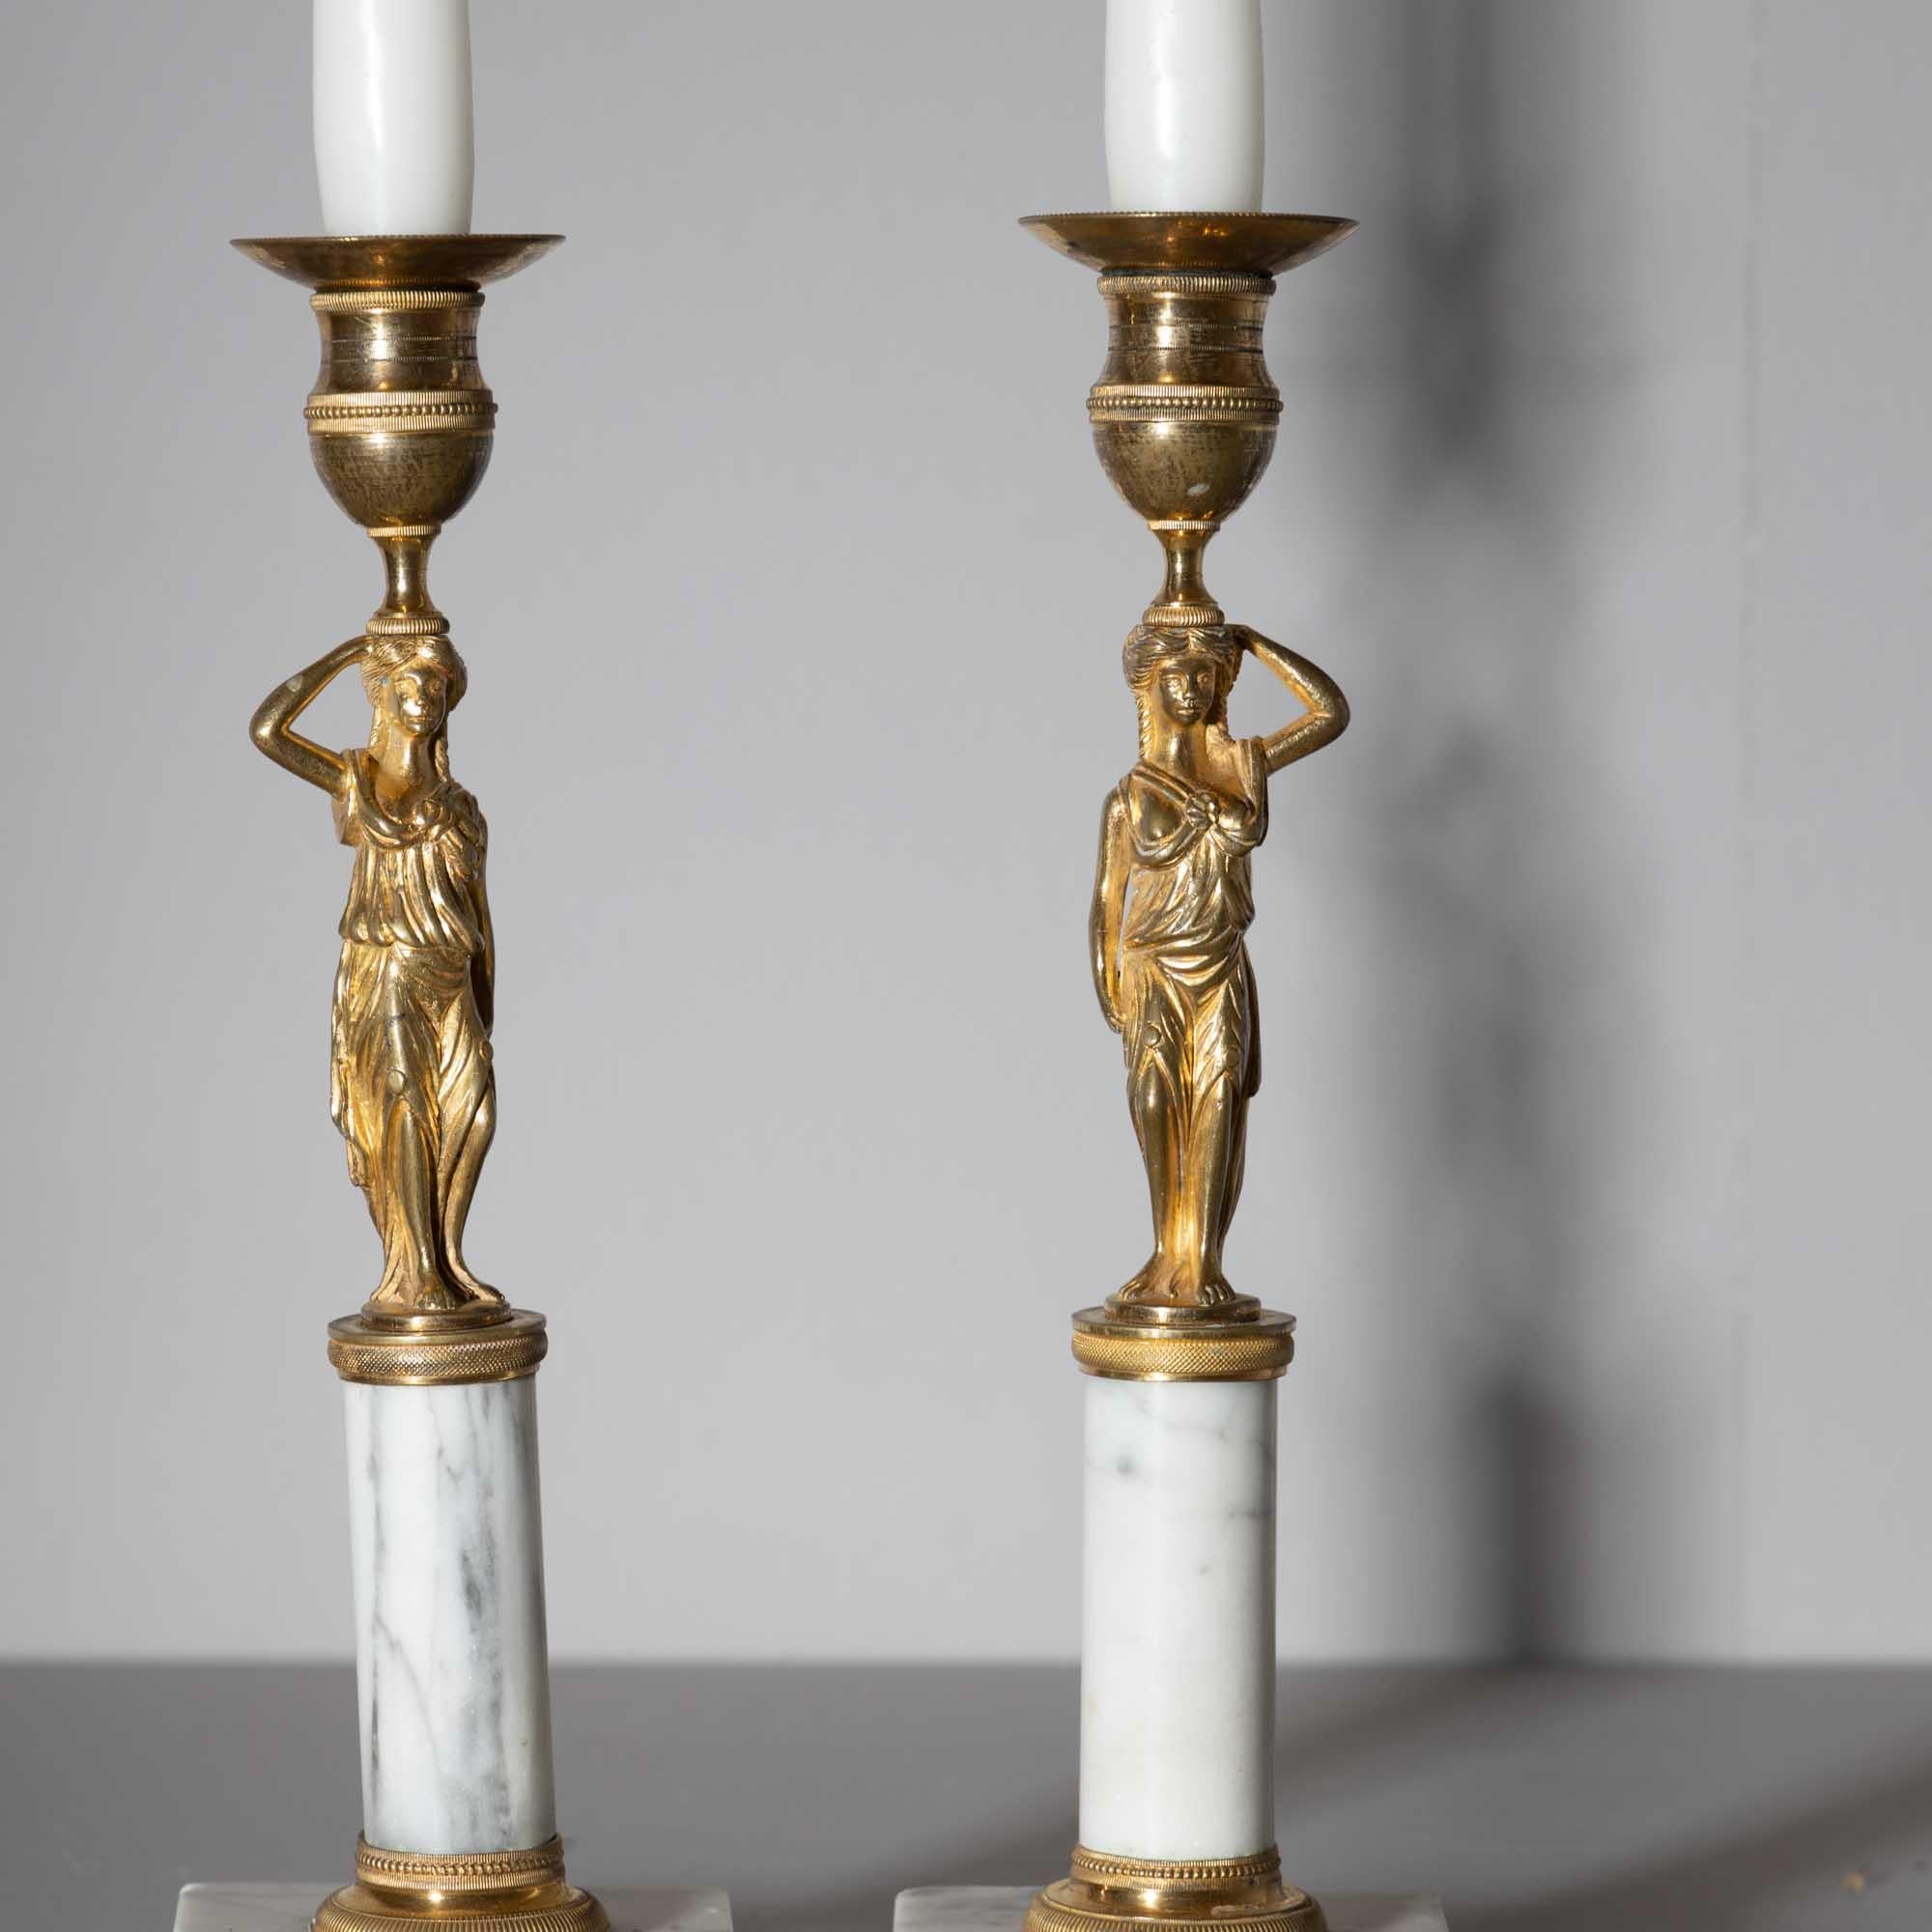 Neoclassical Pair of Candleholders with Karyatids, Bronze & Marble, Berlin Early 19th Century For Sale